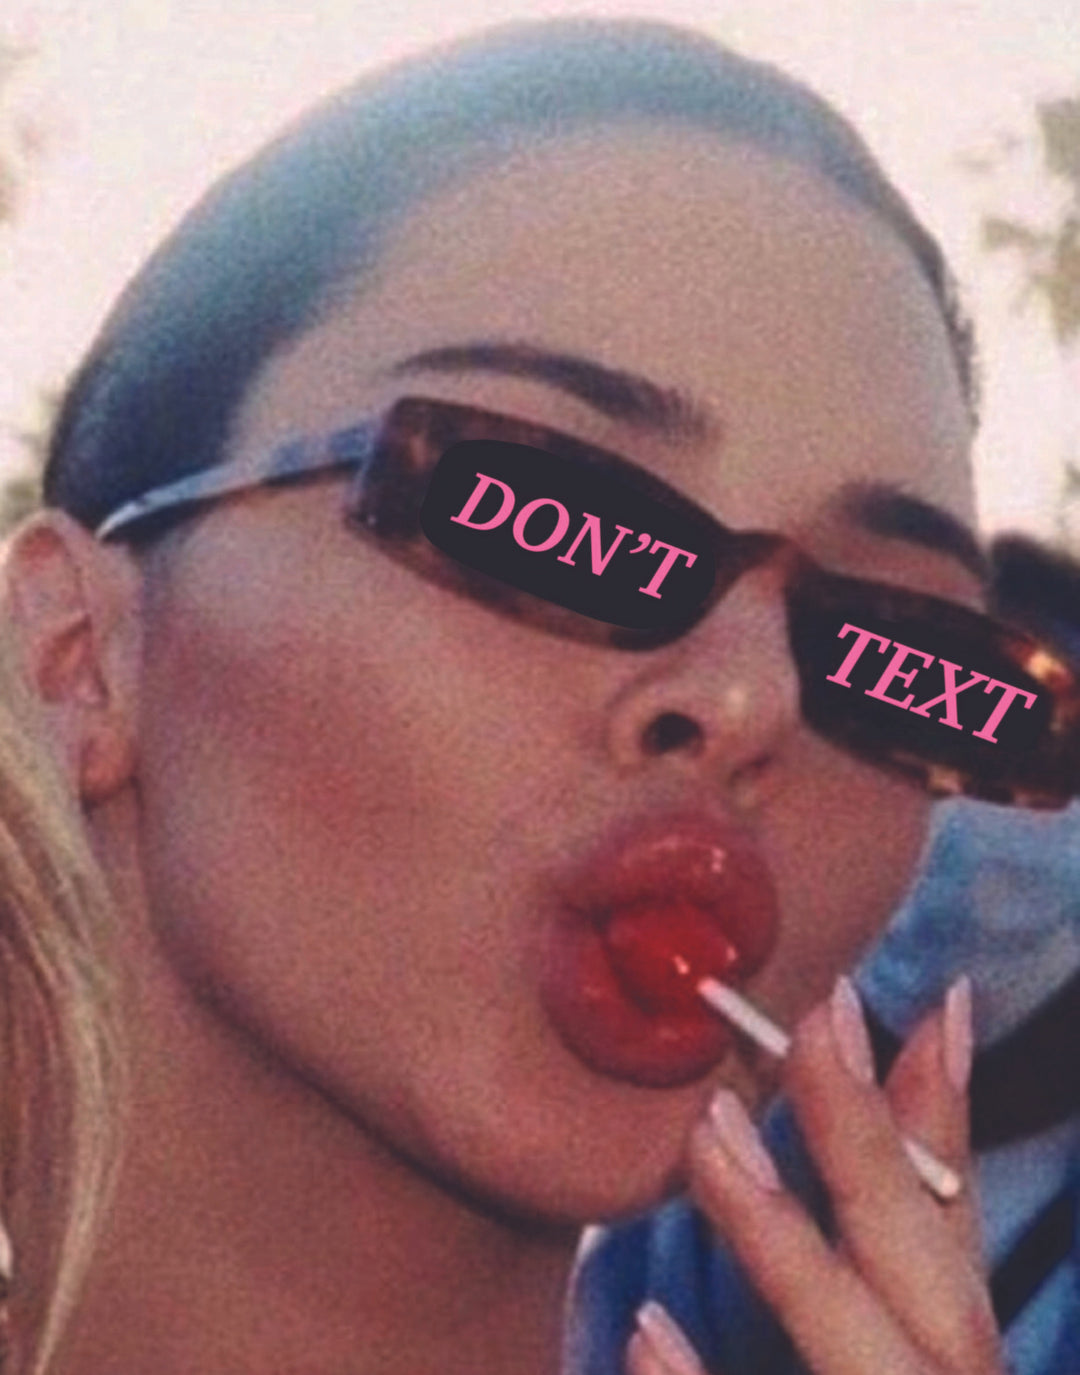 DONT TEXT POSTER - PosterFi